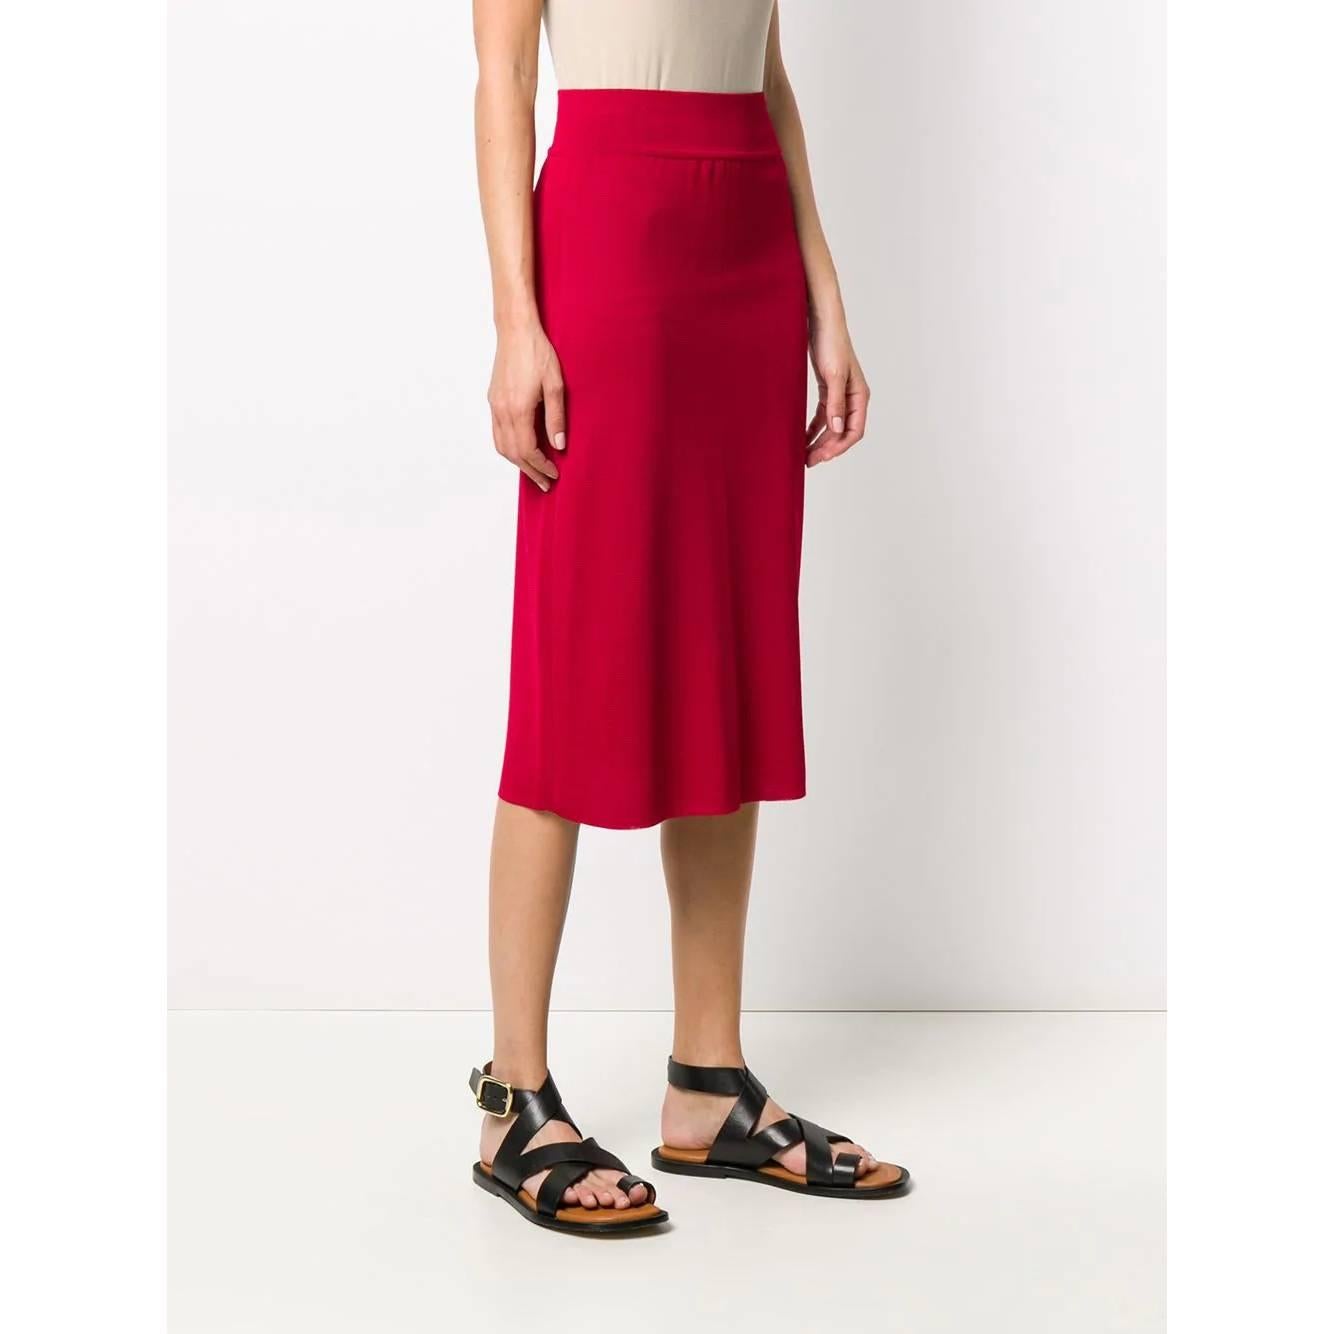 A.N.G.E.L.O. Vintage - ITALY
Céline red knitted viscose skirt. Flared design and elasticated waist.

Years: 90s

Made in Italy

Size: 44 IT

Flat measurements

Length: 73 cm
Waist: 28 cm
Hips: 45 cm
